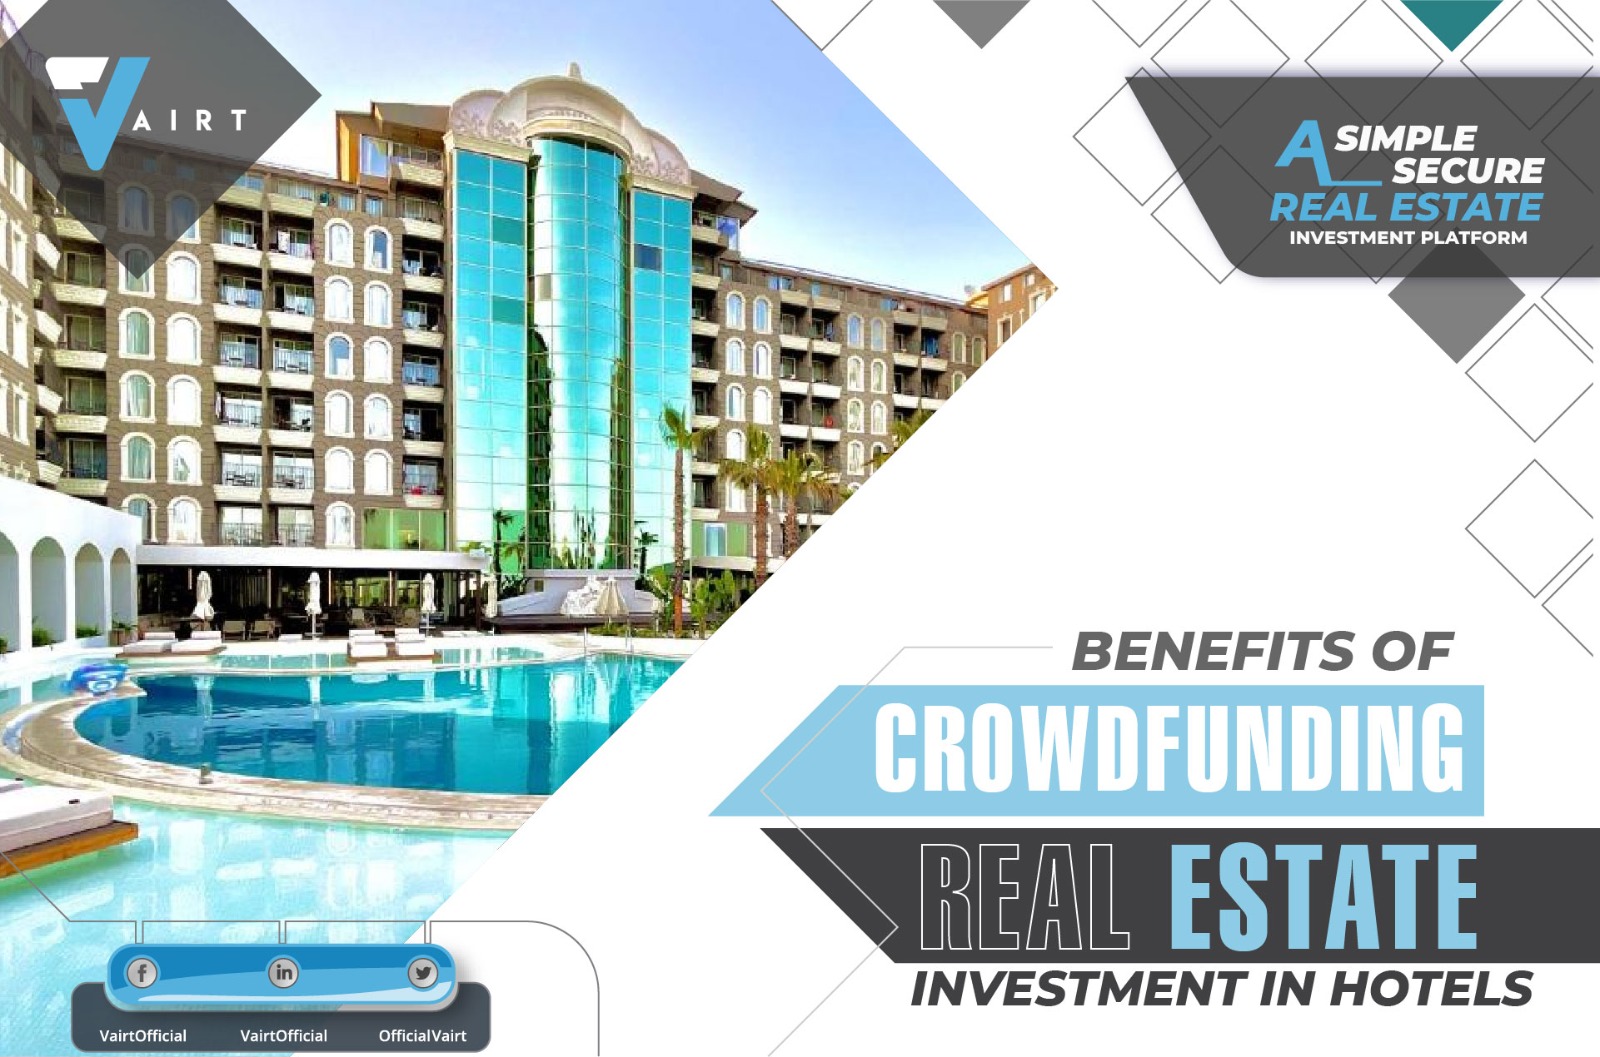 Crowdfunding Real Estate Investment in Hotels